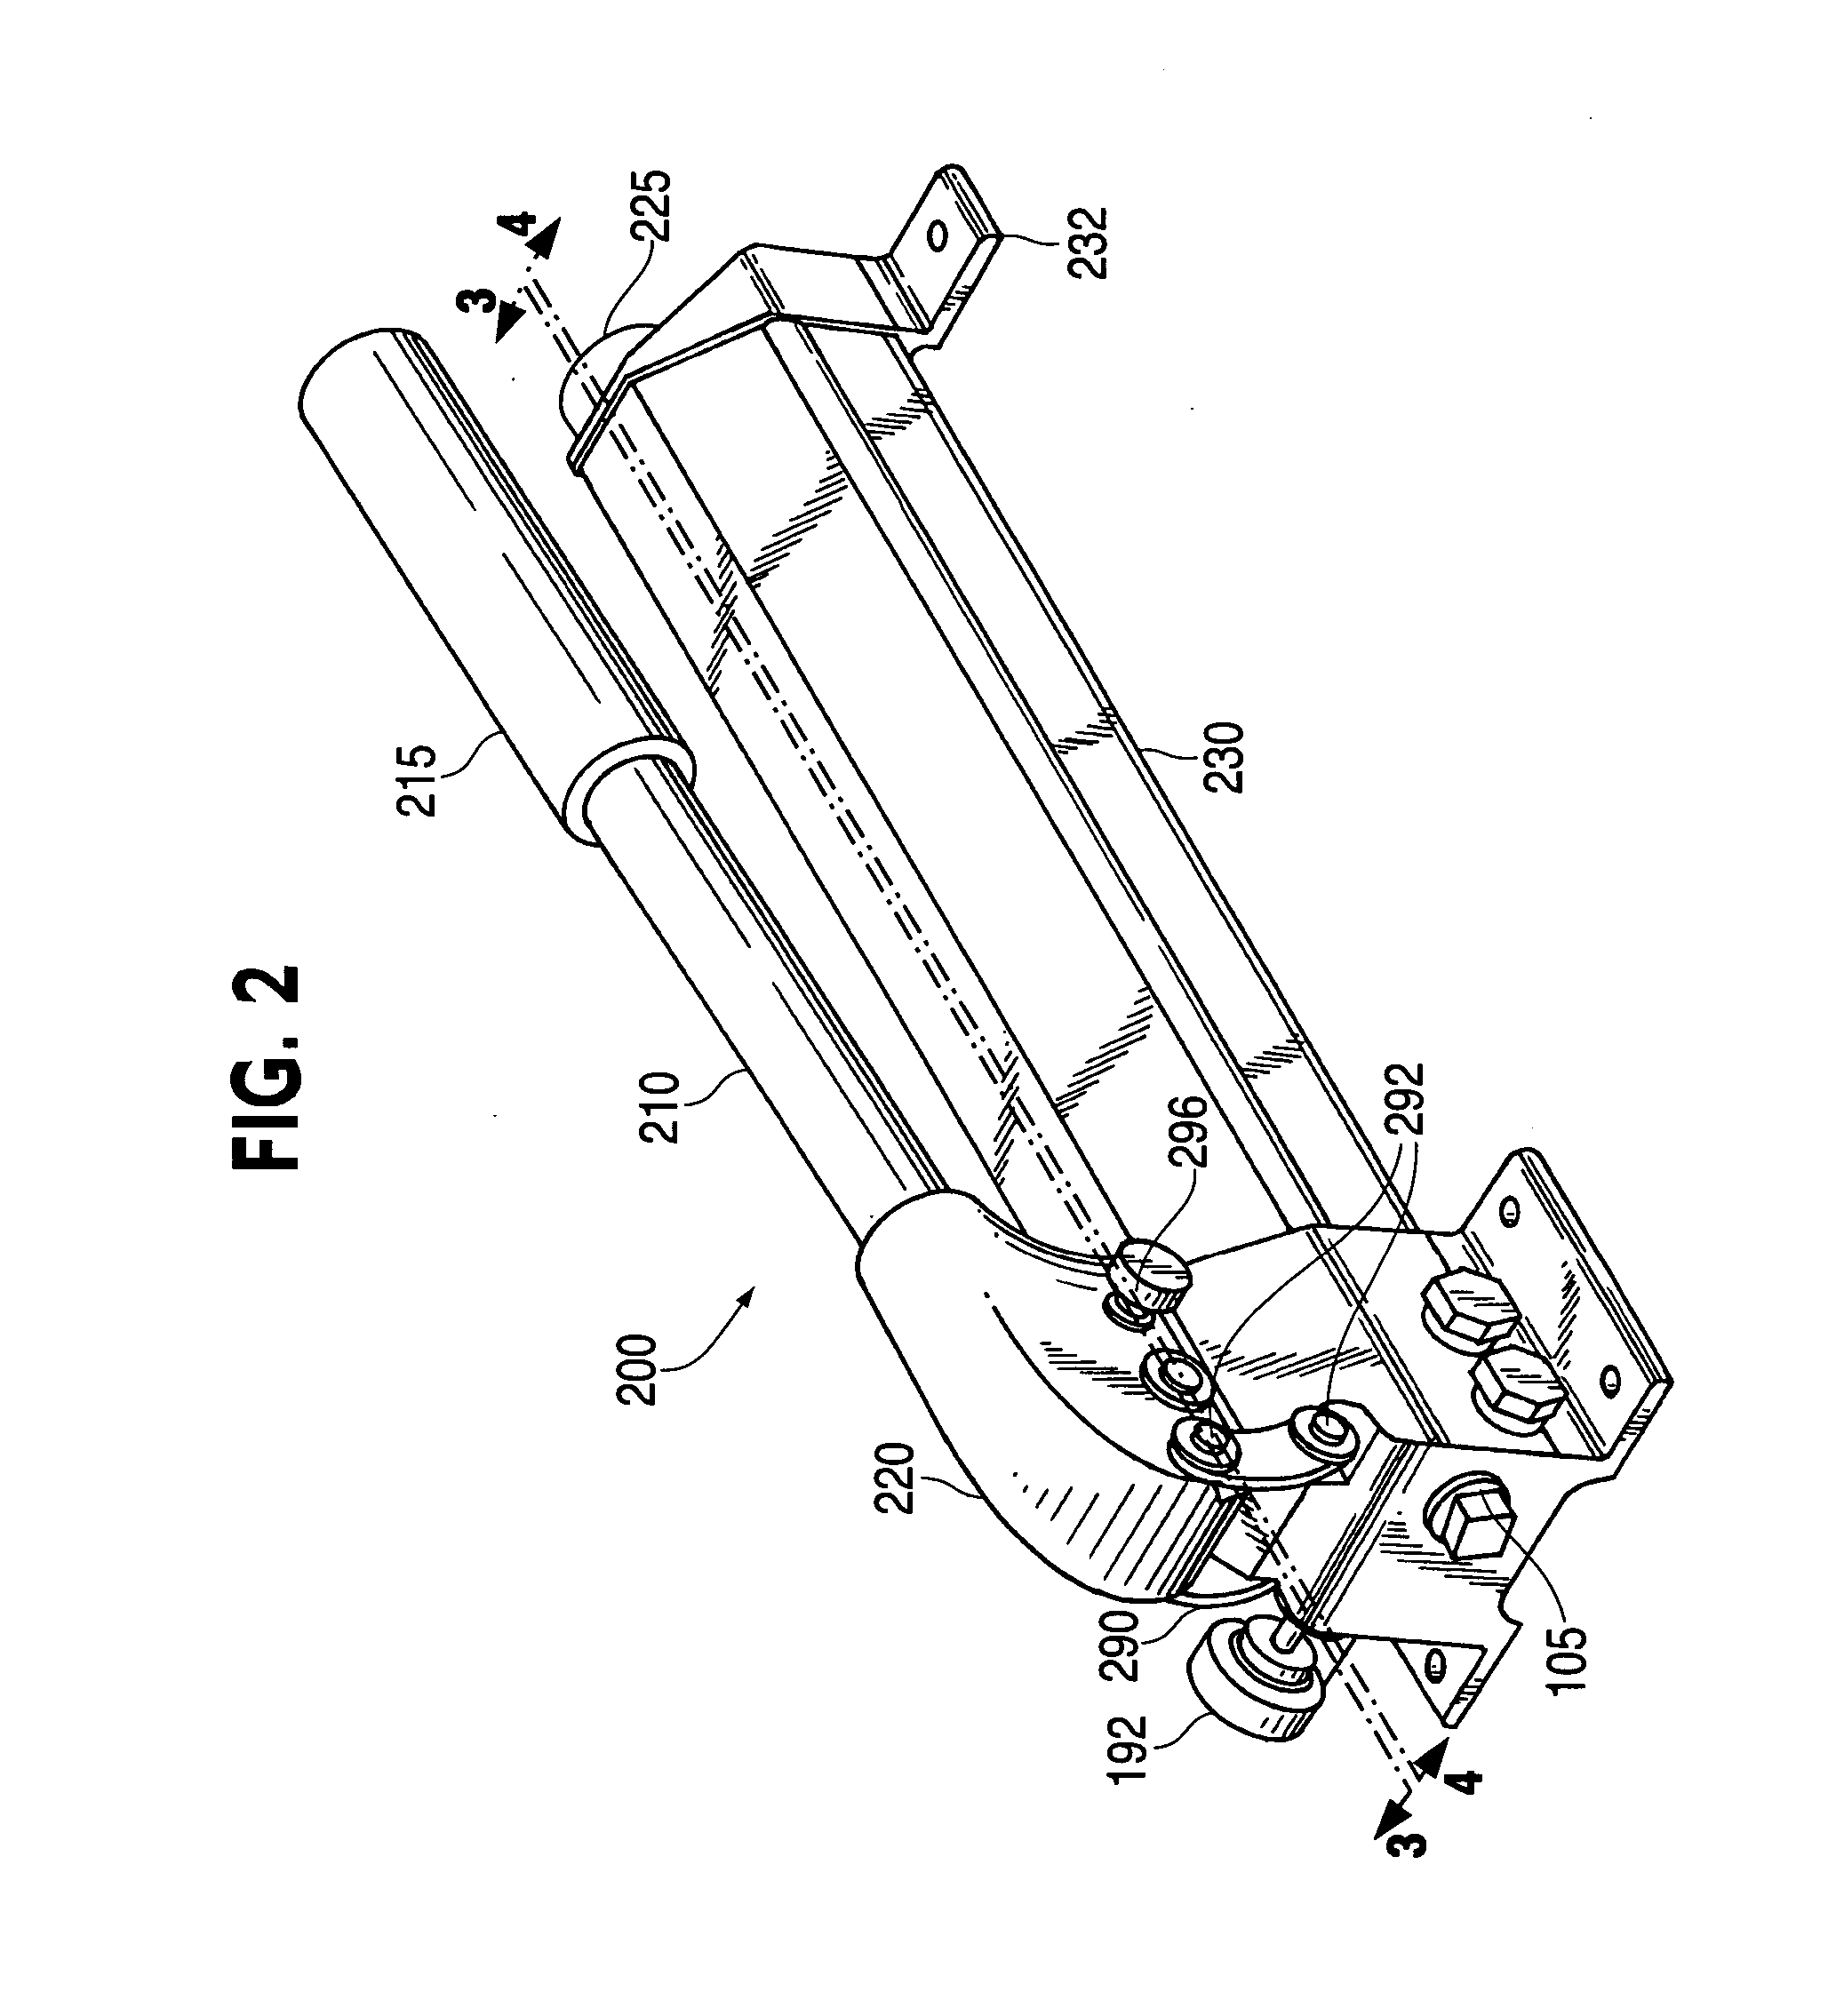 Hydraulic hand pump with pivoting links